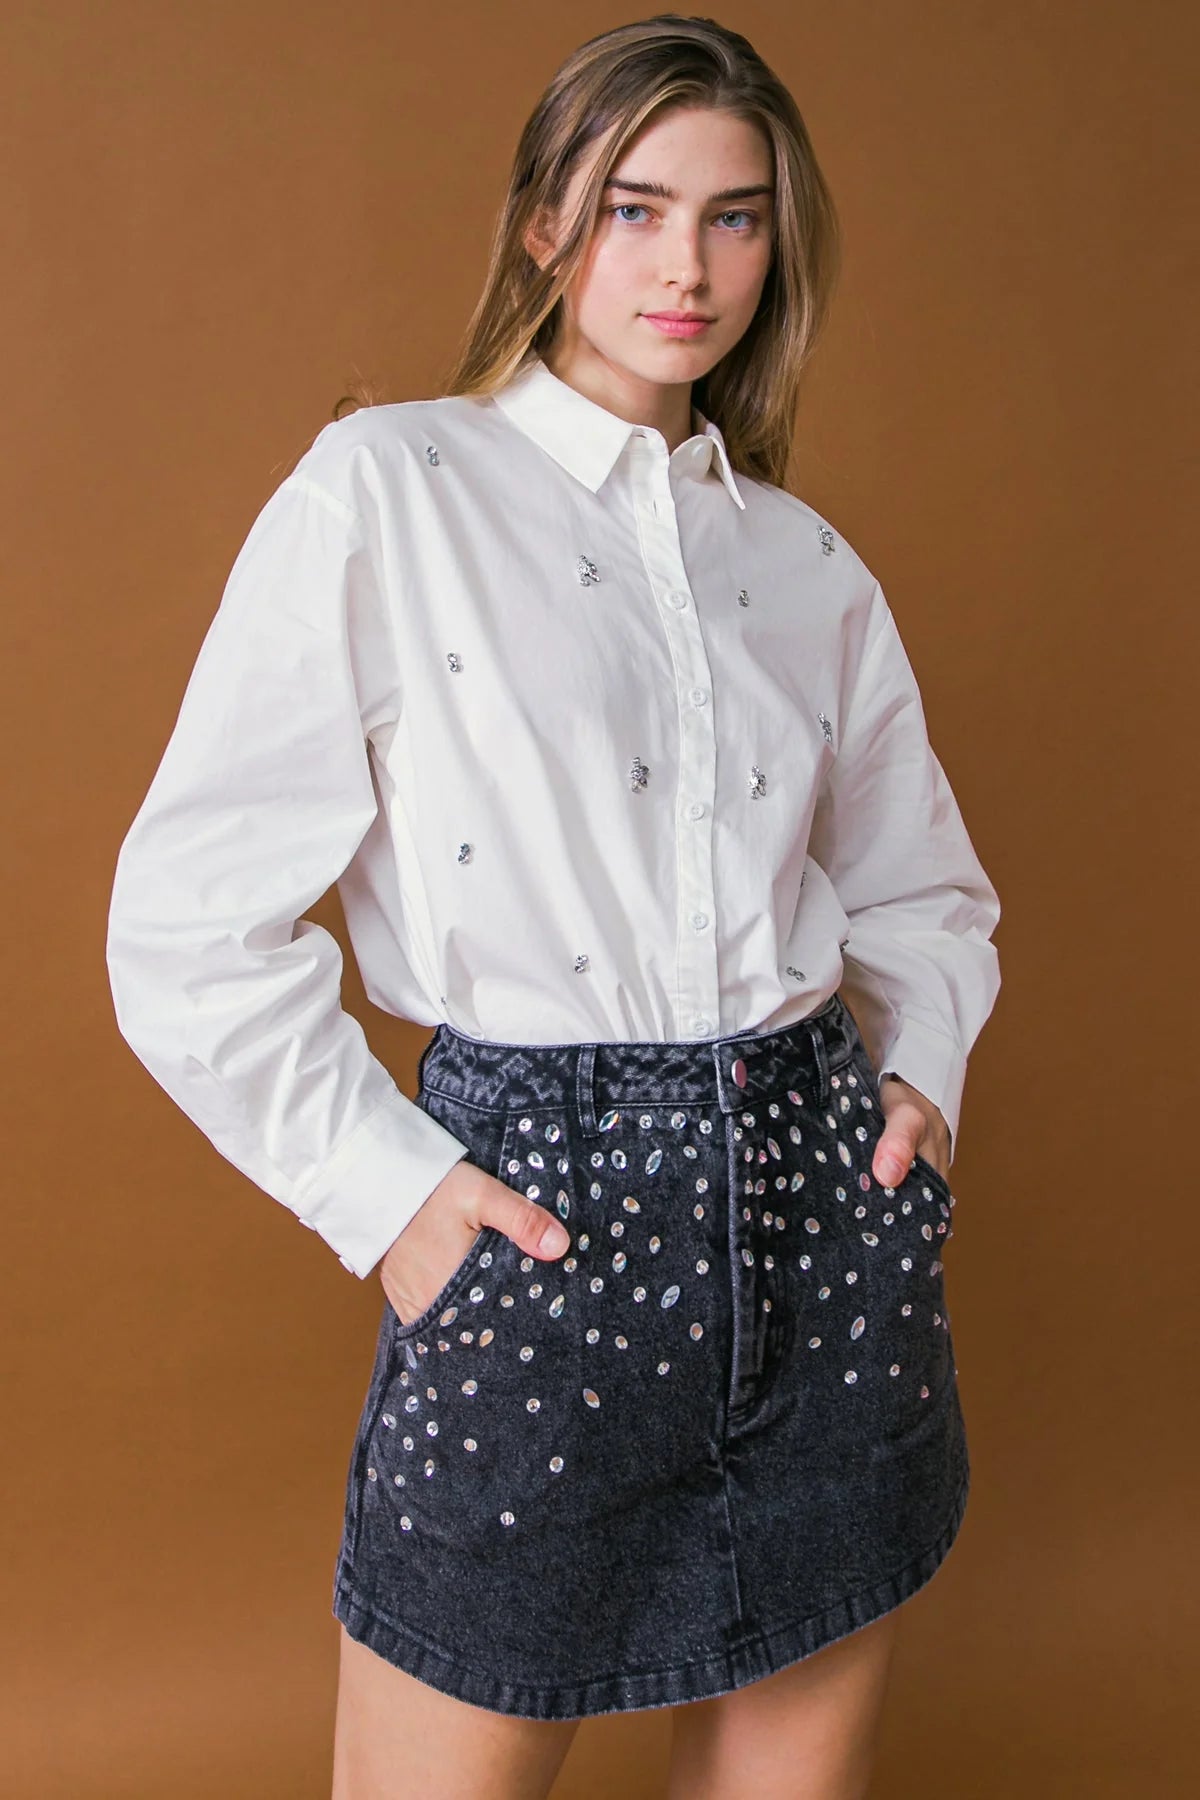 zSALE Annette Embellished Collared Button Up Poplin Shirt - White